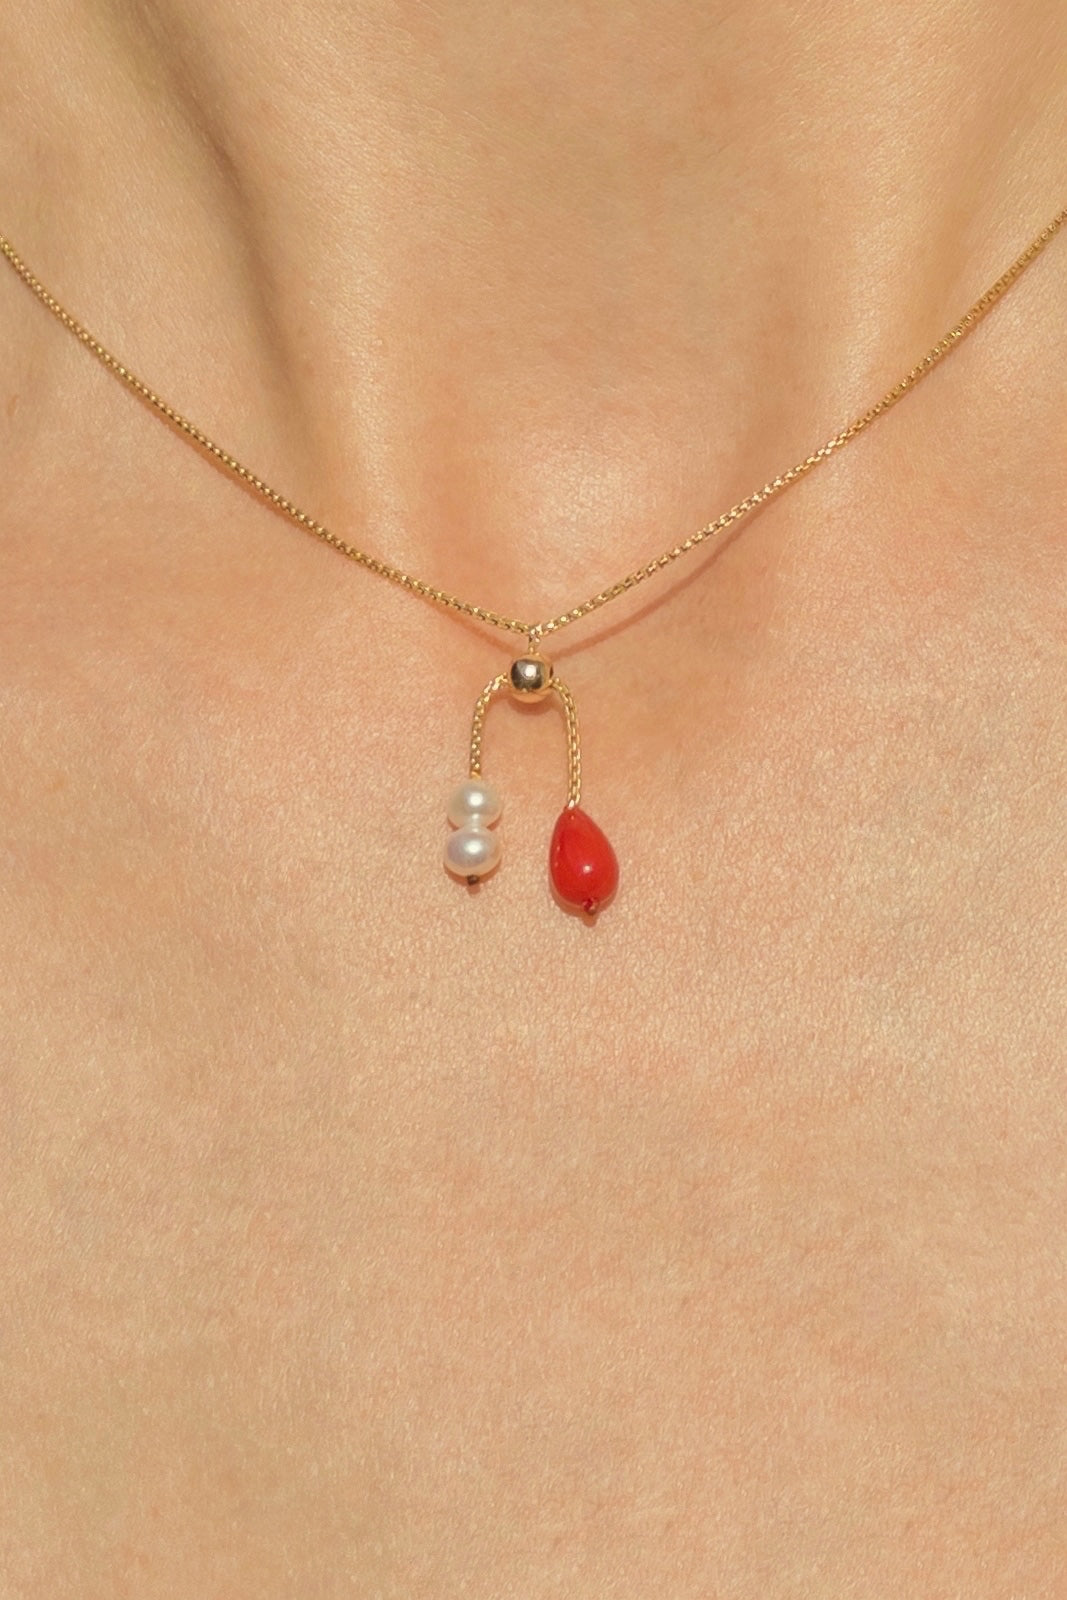 Red Coral Necklace with Freshwater Pearls – Lireille